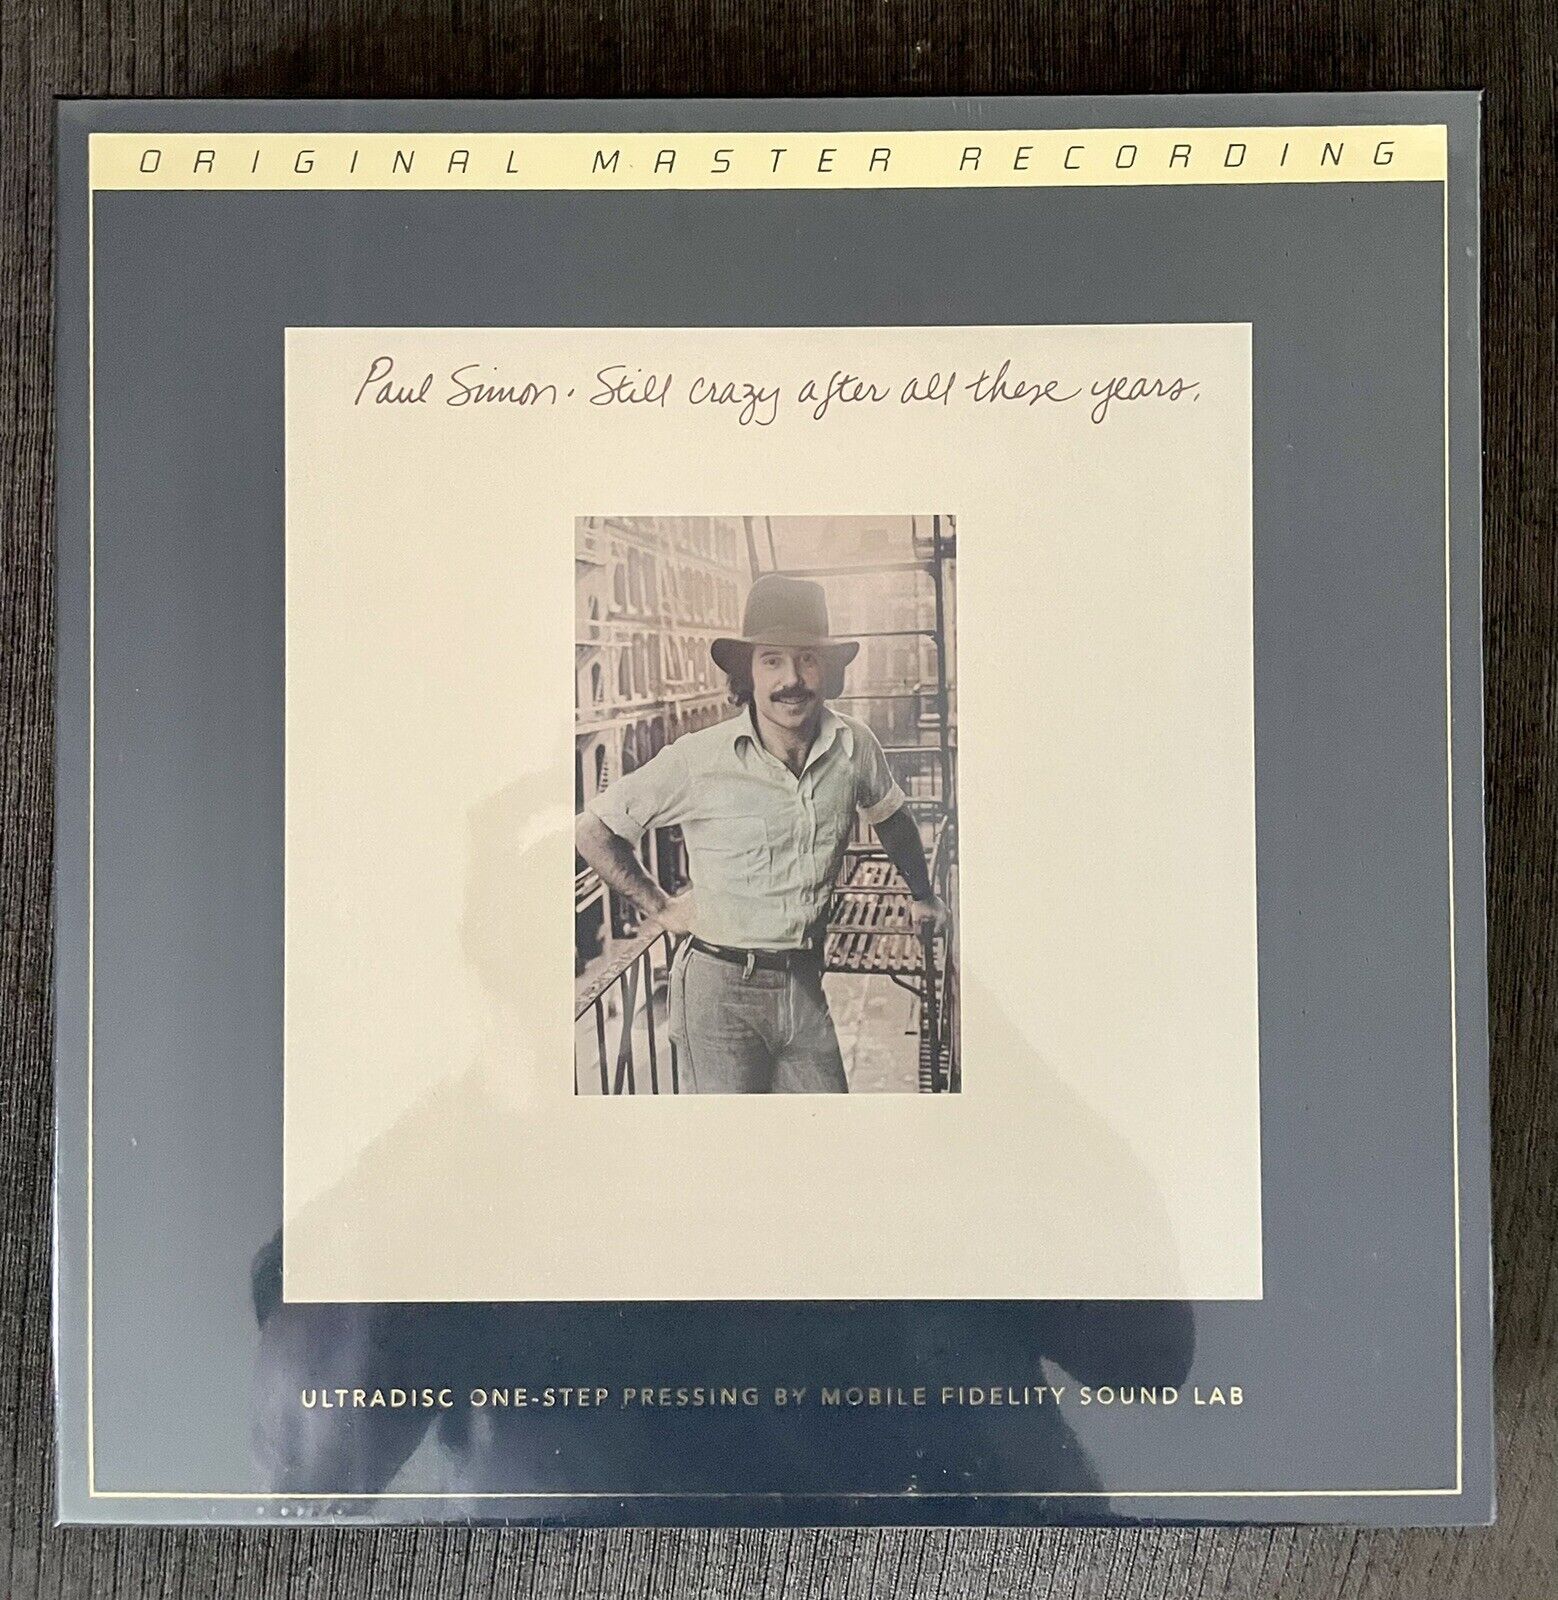 Image 1 - Paul Simon - Still Crazy After All These Years -  MOFI One Step - Sealed - Mint